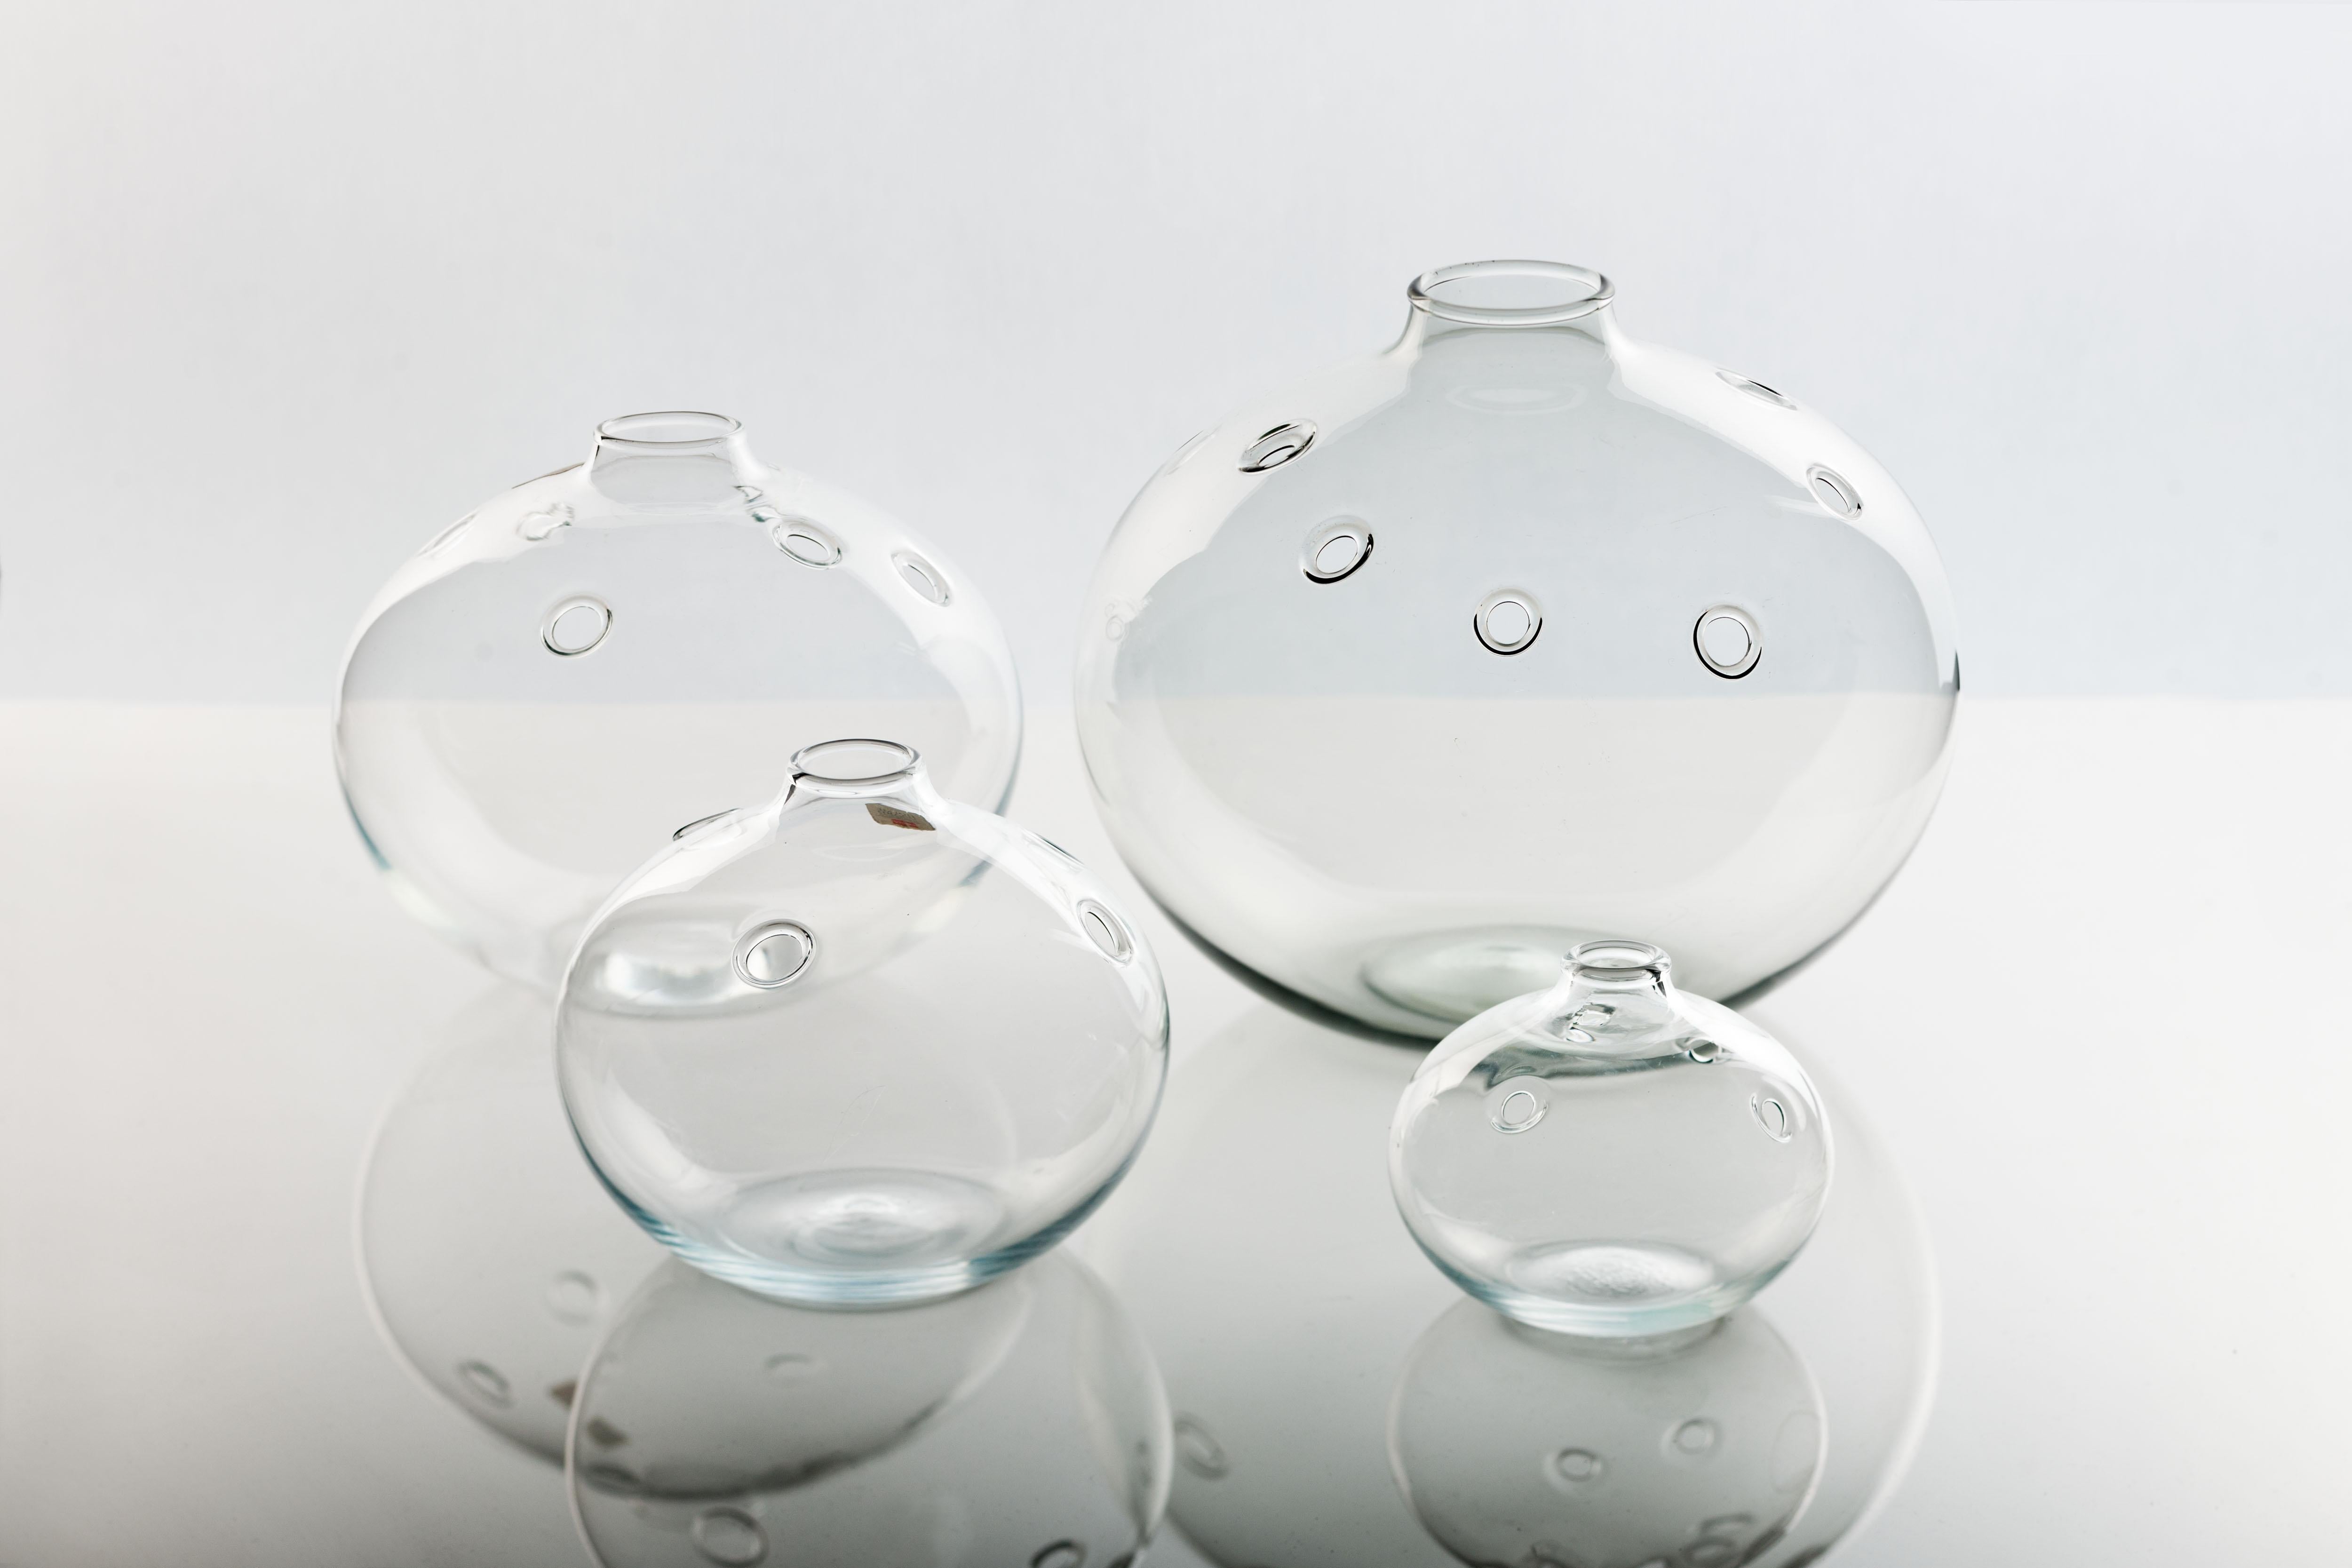 Set of four sizes mouth blown clear glass Hull (hole) vases, designed by Michael Bang for Holmegaard Denmark, 1970s. Produced between 1973-1978.
Vases are executed with holes to place and arrange flowers in. 
Each individual vase is signed with